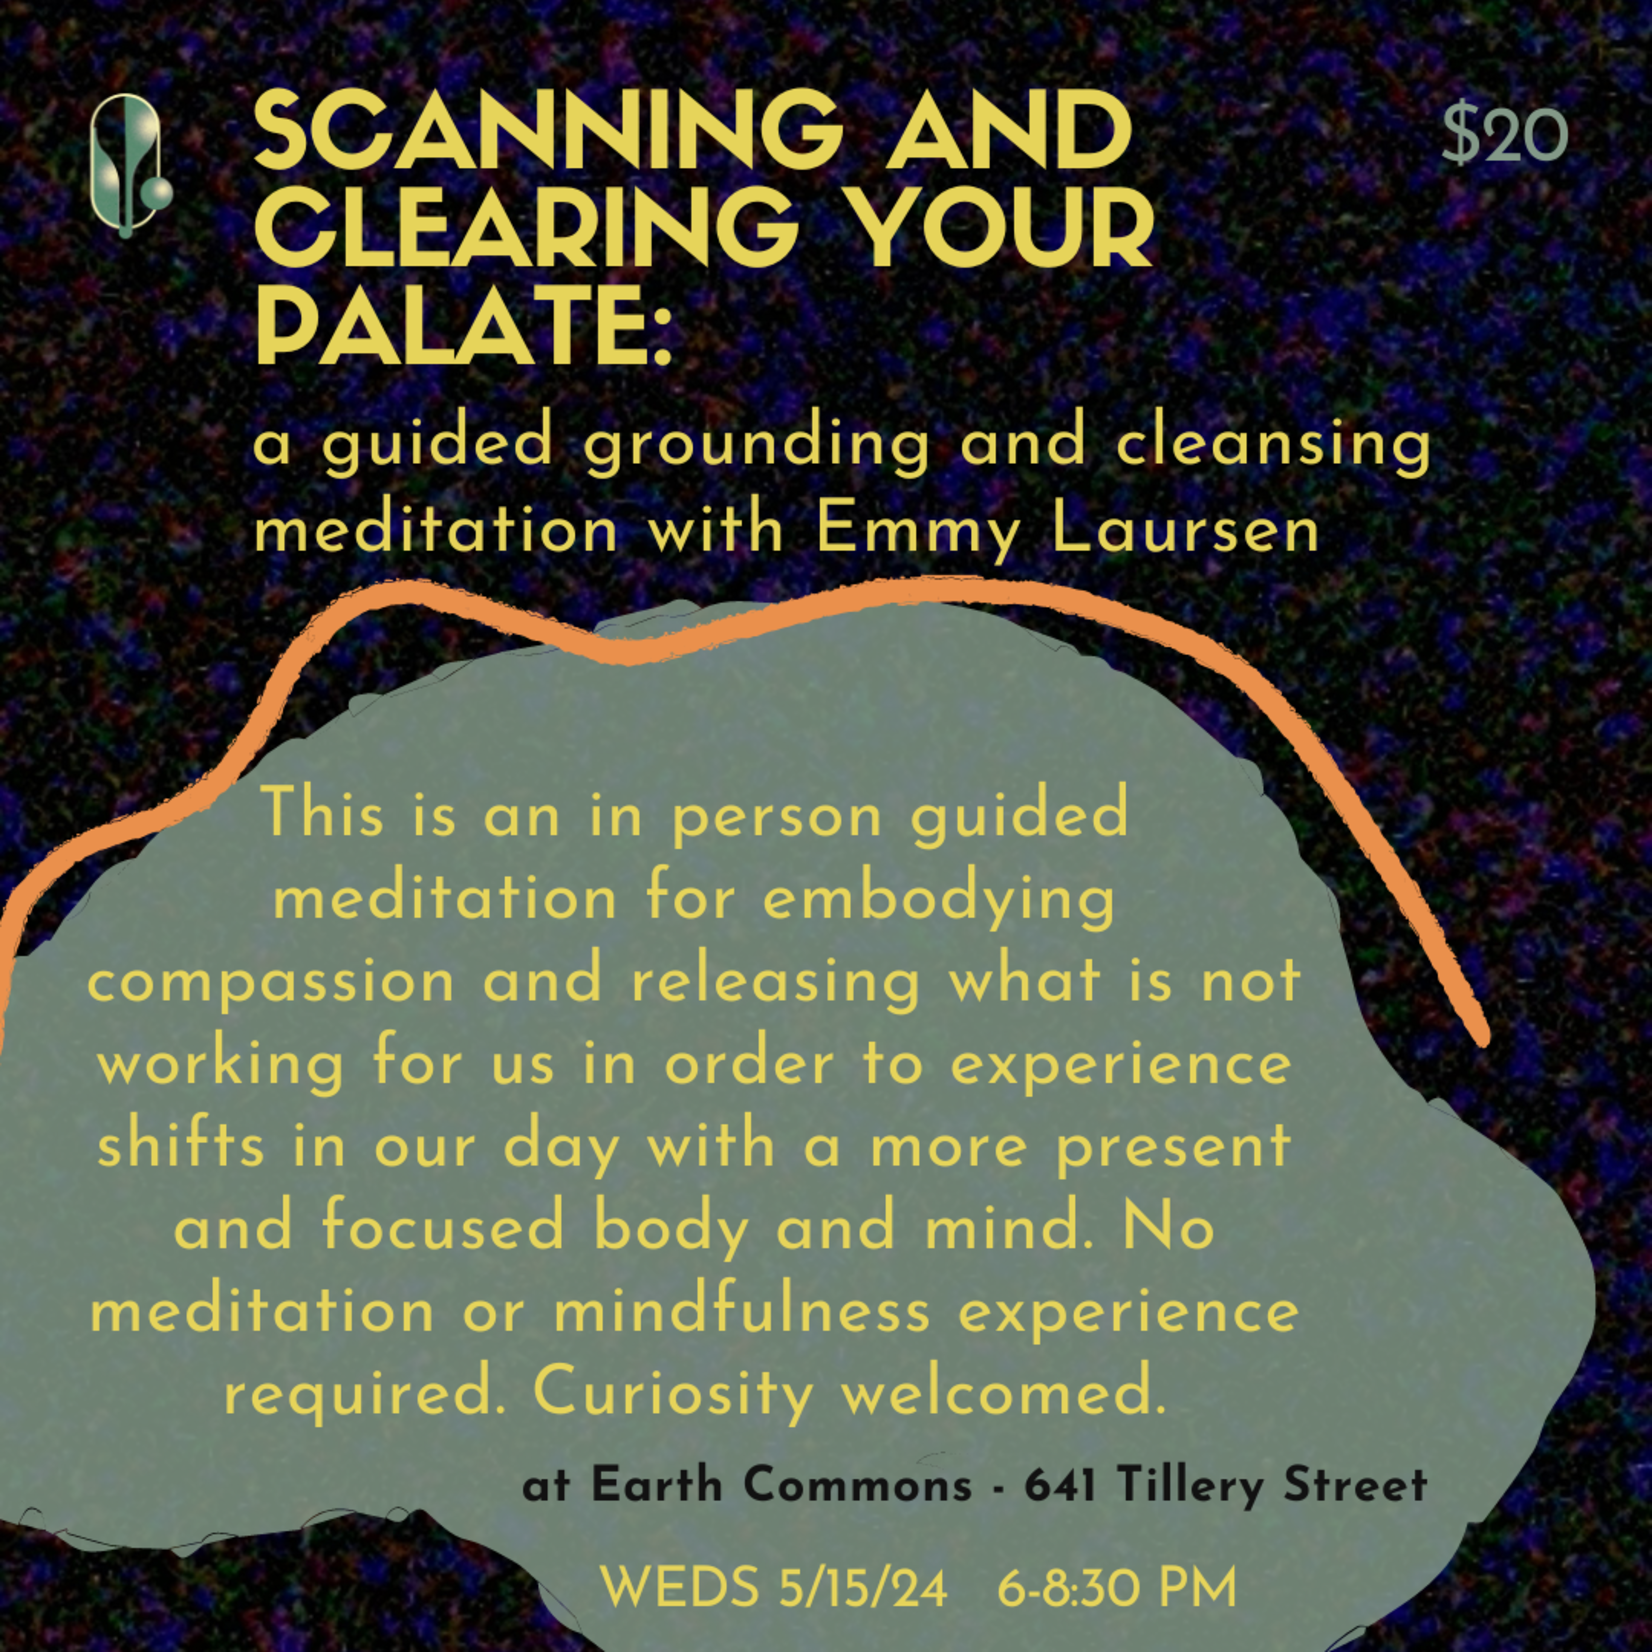 Scanning and Clearing your Palate  - Meditation with Emmy Laursen